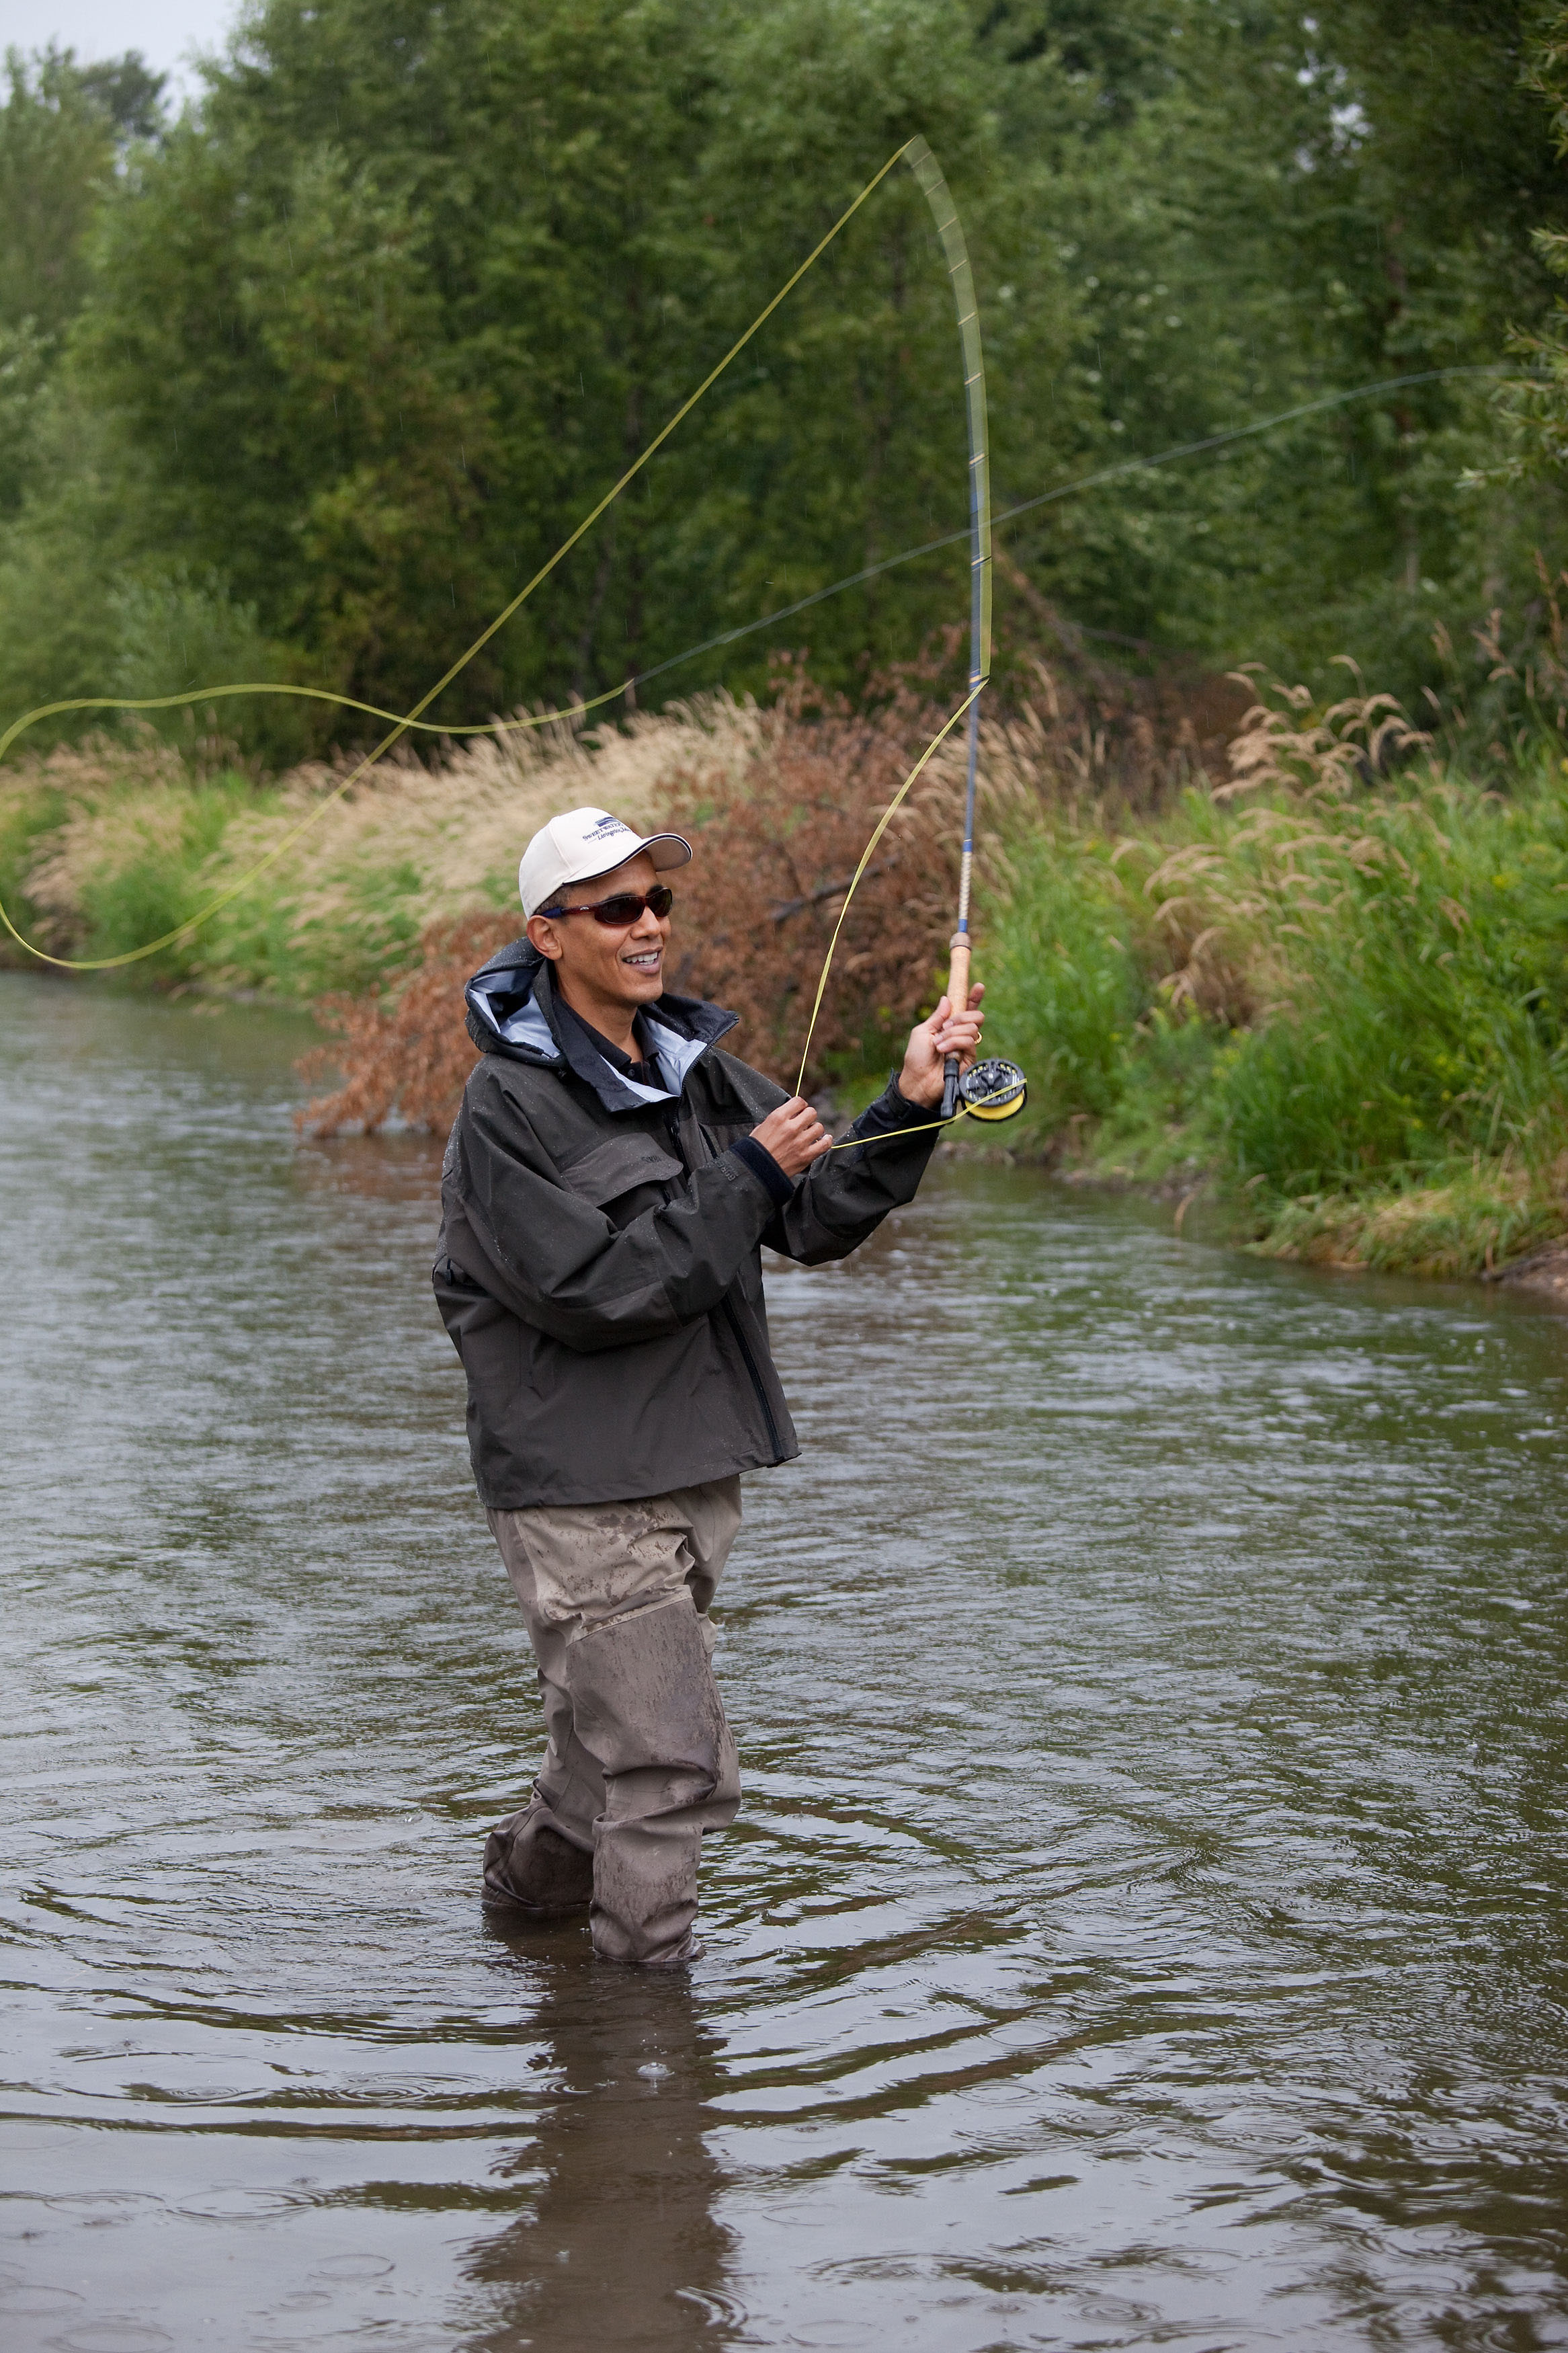 File:President Barack Obama casts his line while fishing for trout on the East Gallatin River near Belgrade, Mont., on Aug. 14, 2009.jpg - Wikimedia Commons